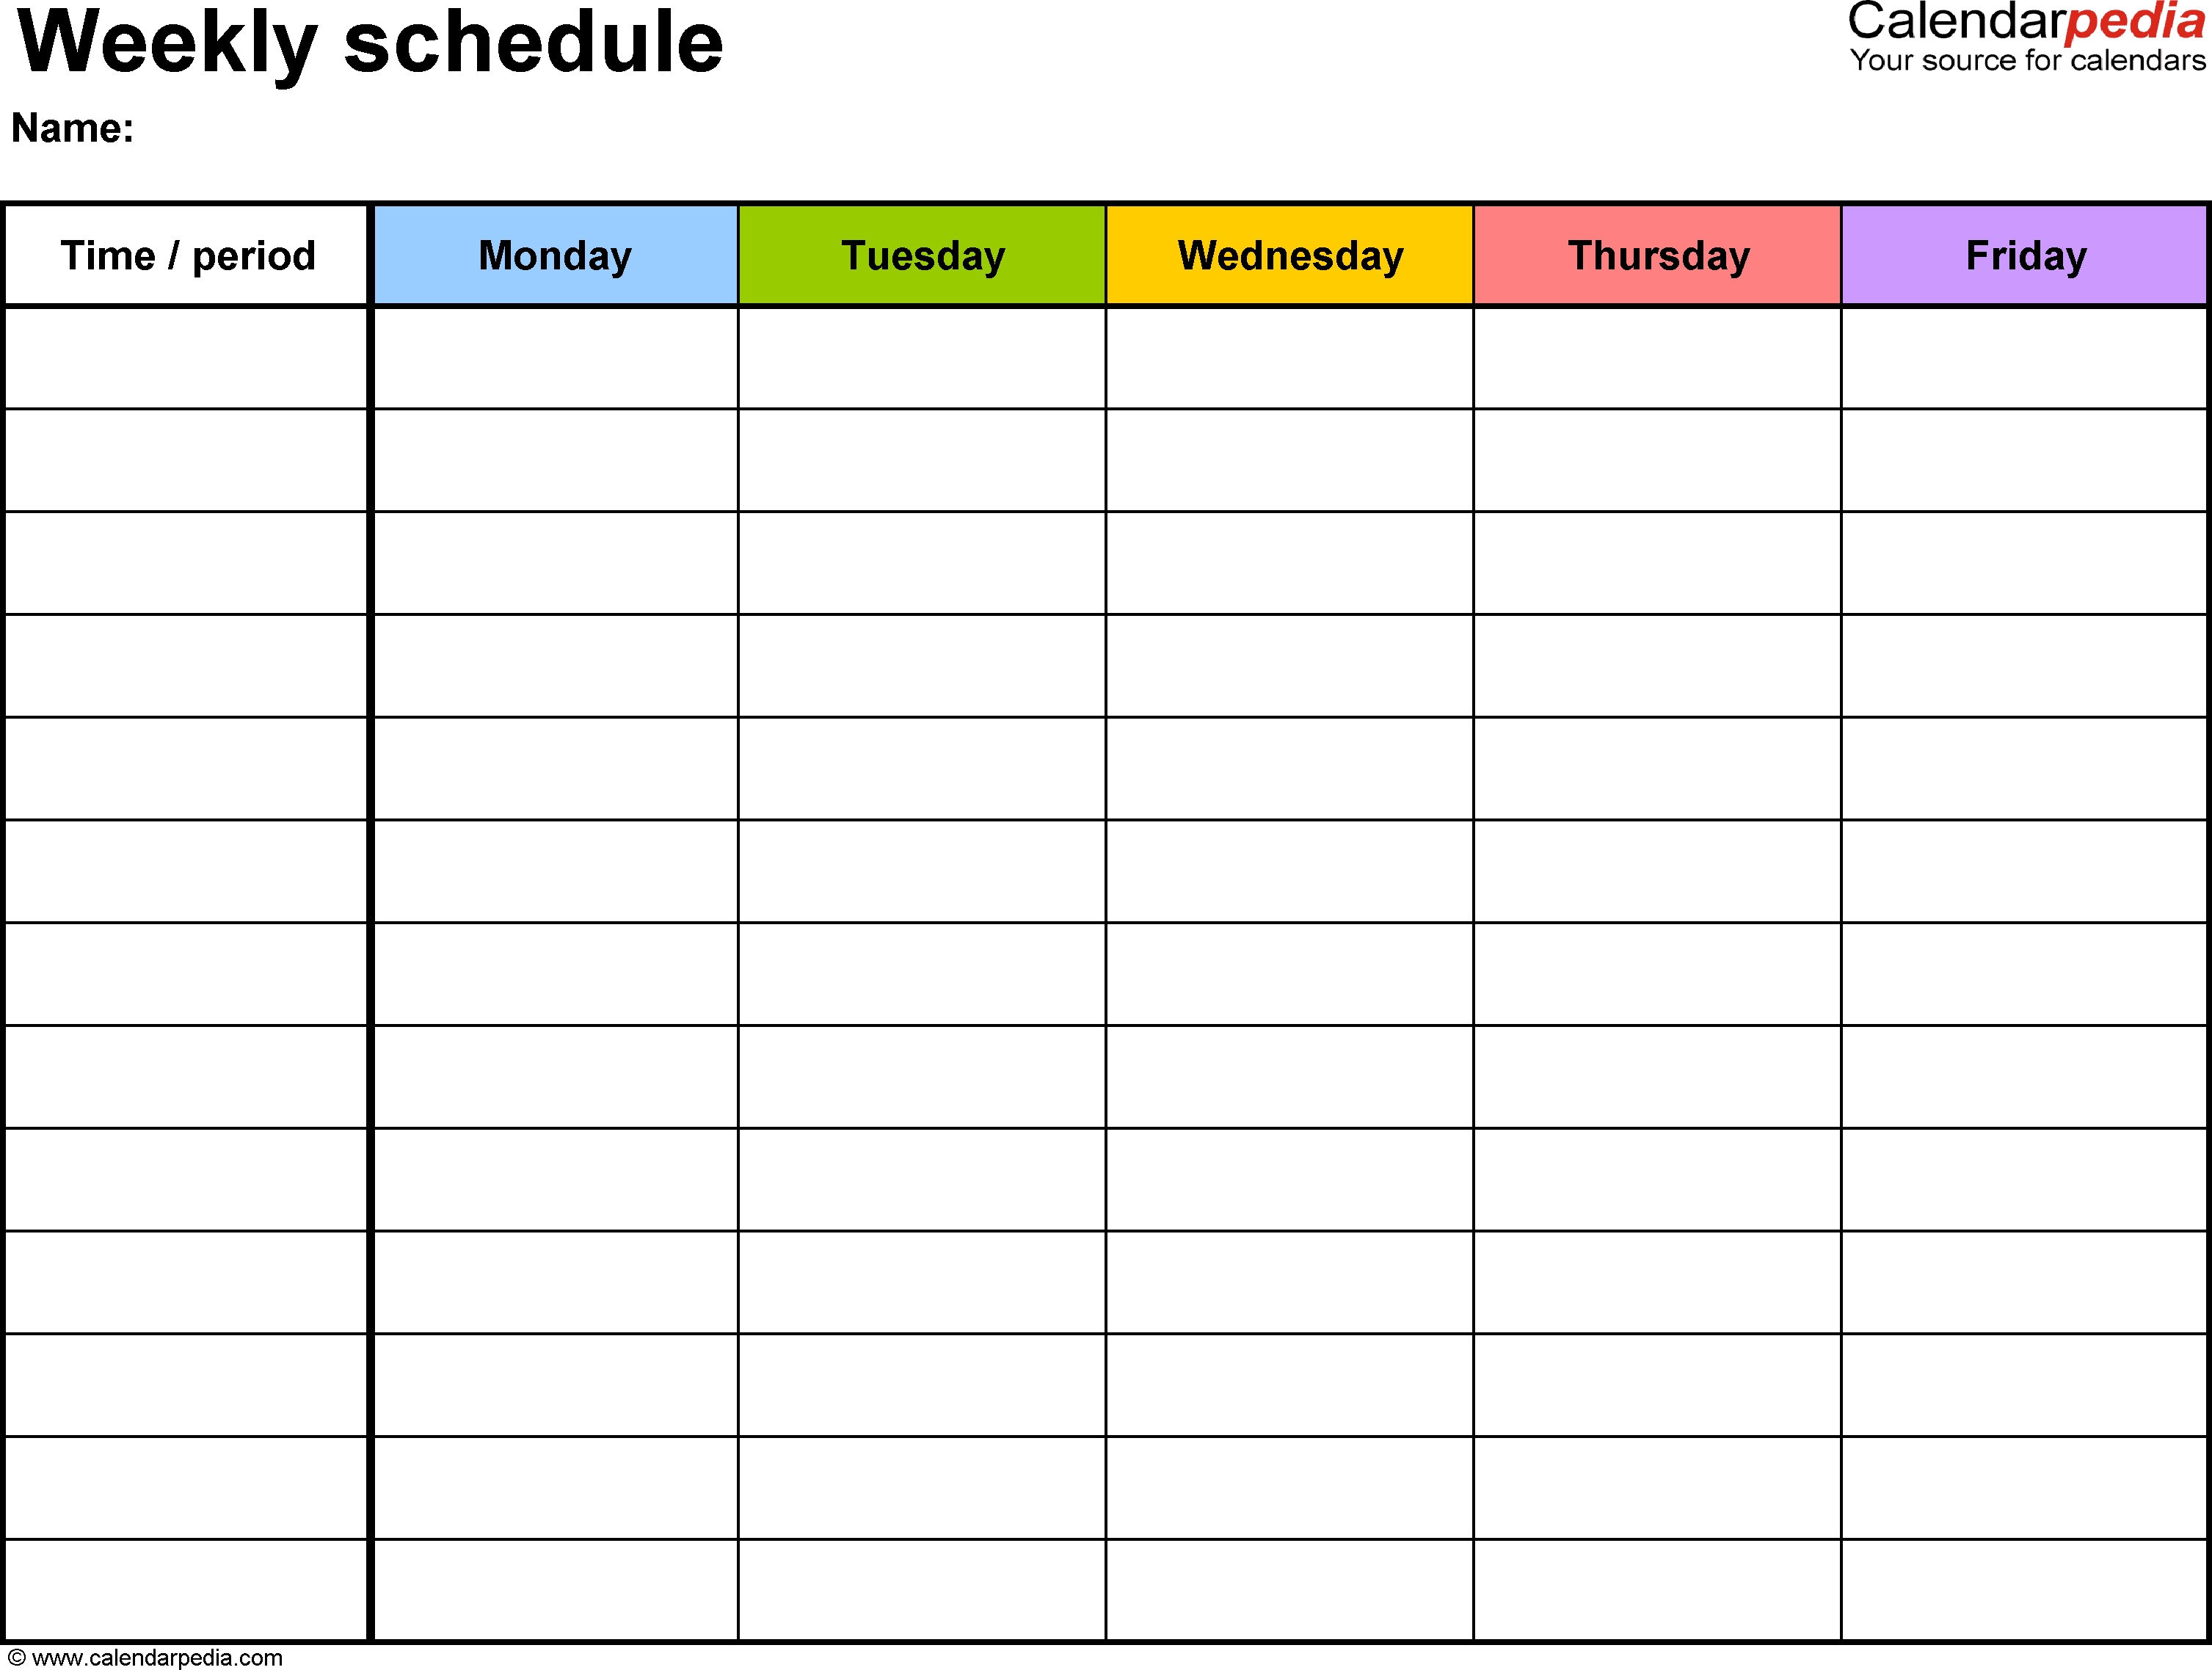 Free Weekly Schedule Templates For Excel - 18 Templates  Monthly Calendar By Week Excel